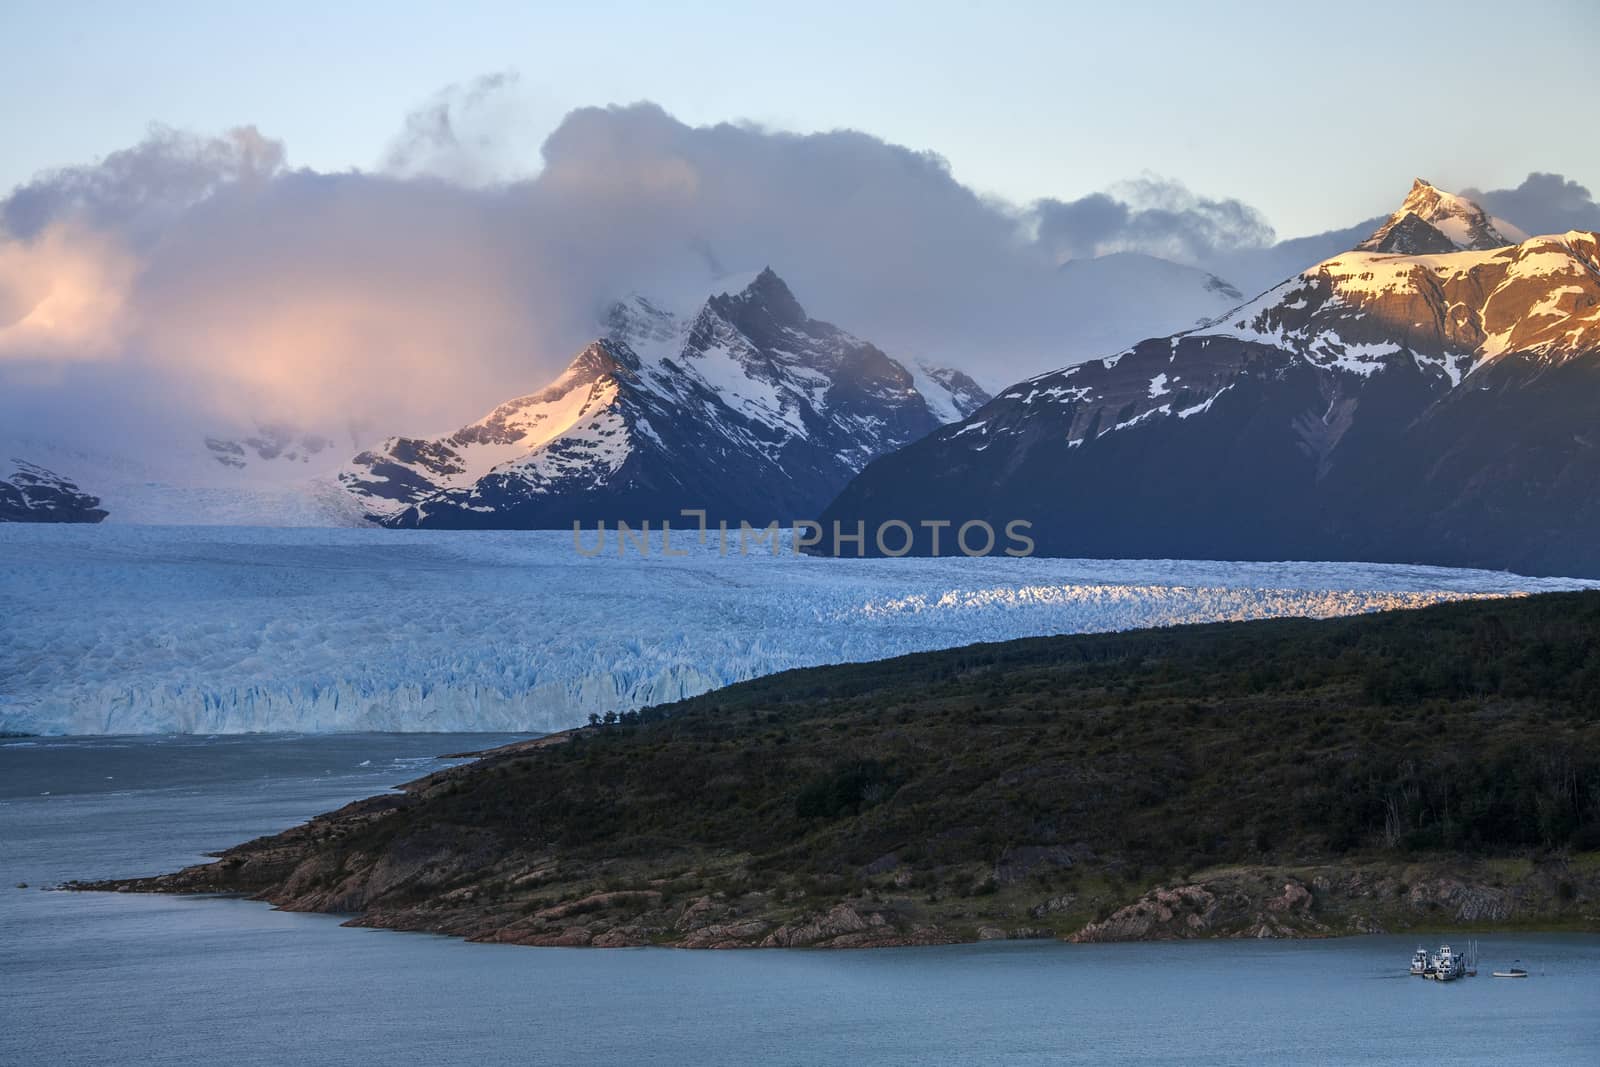 First rays of dawn sunlight on the peaks around the Perito Moreno Glacier. A glacier located in the Los Glaciares National Park in Patagonia in the southwest of Santa Cruz province in Argentina. 